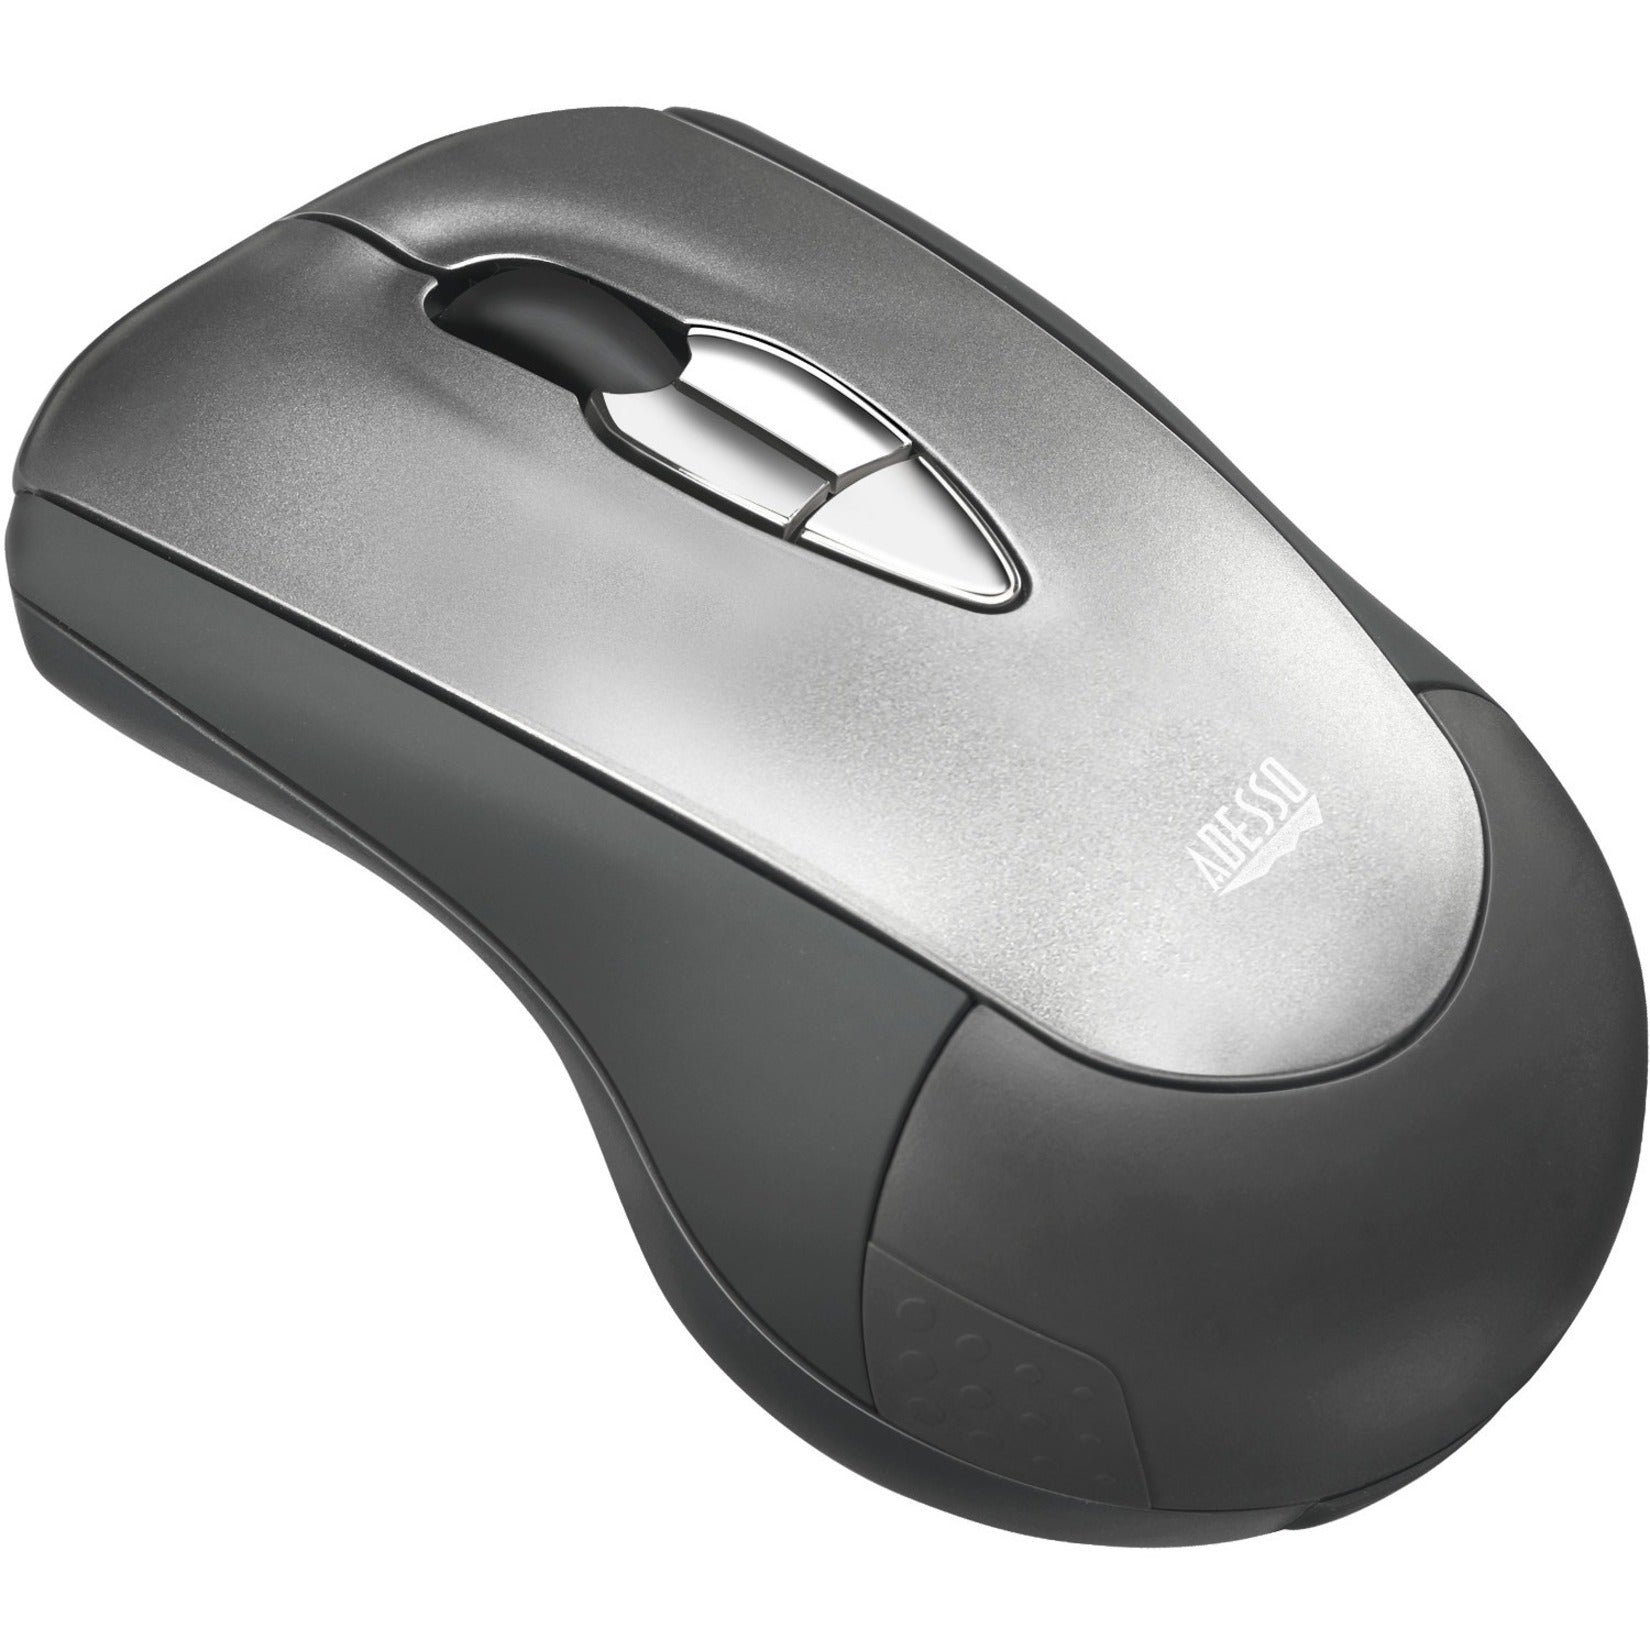 Adesso WKB-5100CB Air Mouse Mobile With Compact Keyboard, Wireless 2.4 GHz, Rechargeable Battery, Quiet Keys, Slim